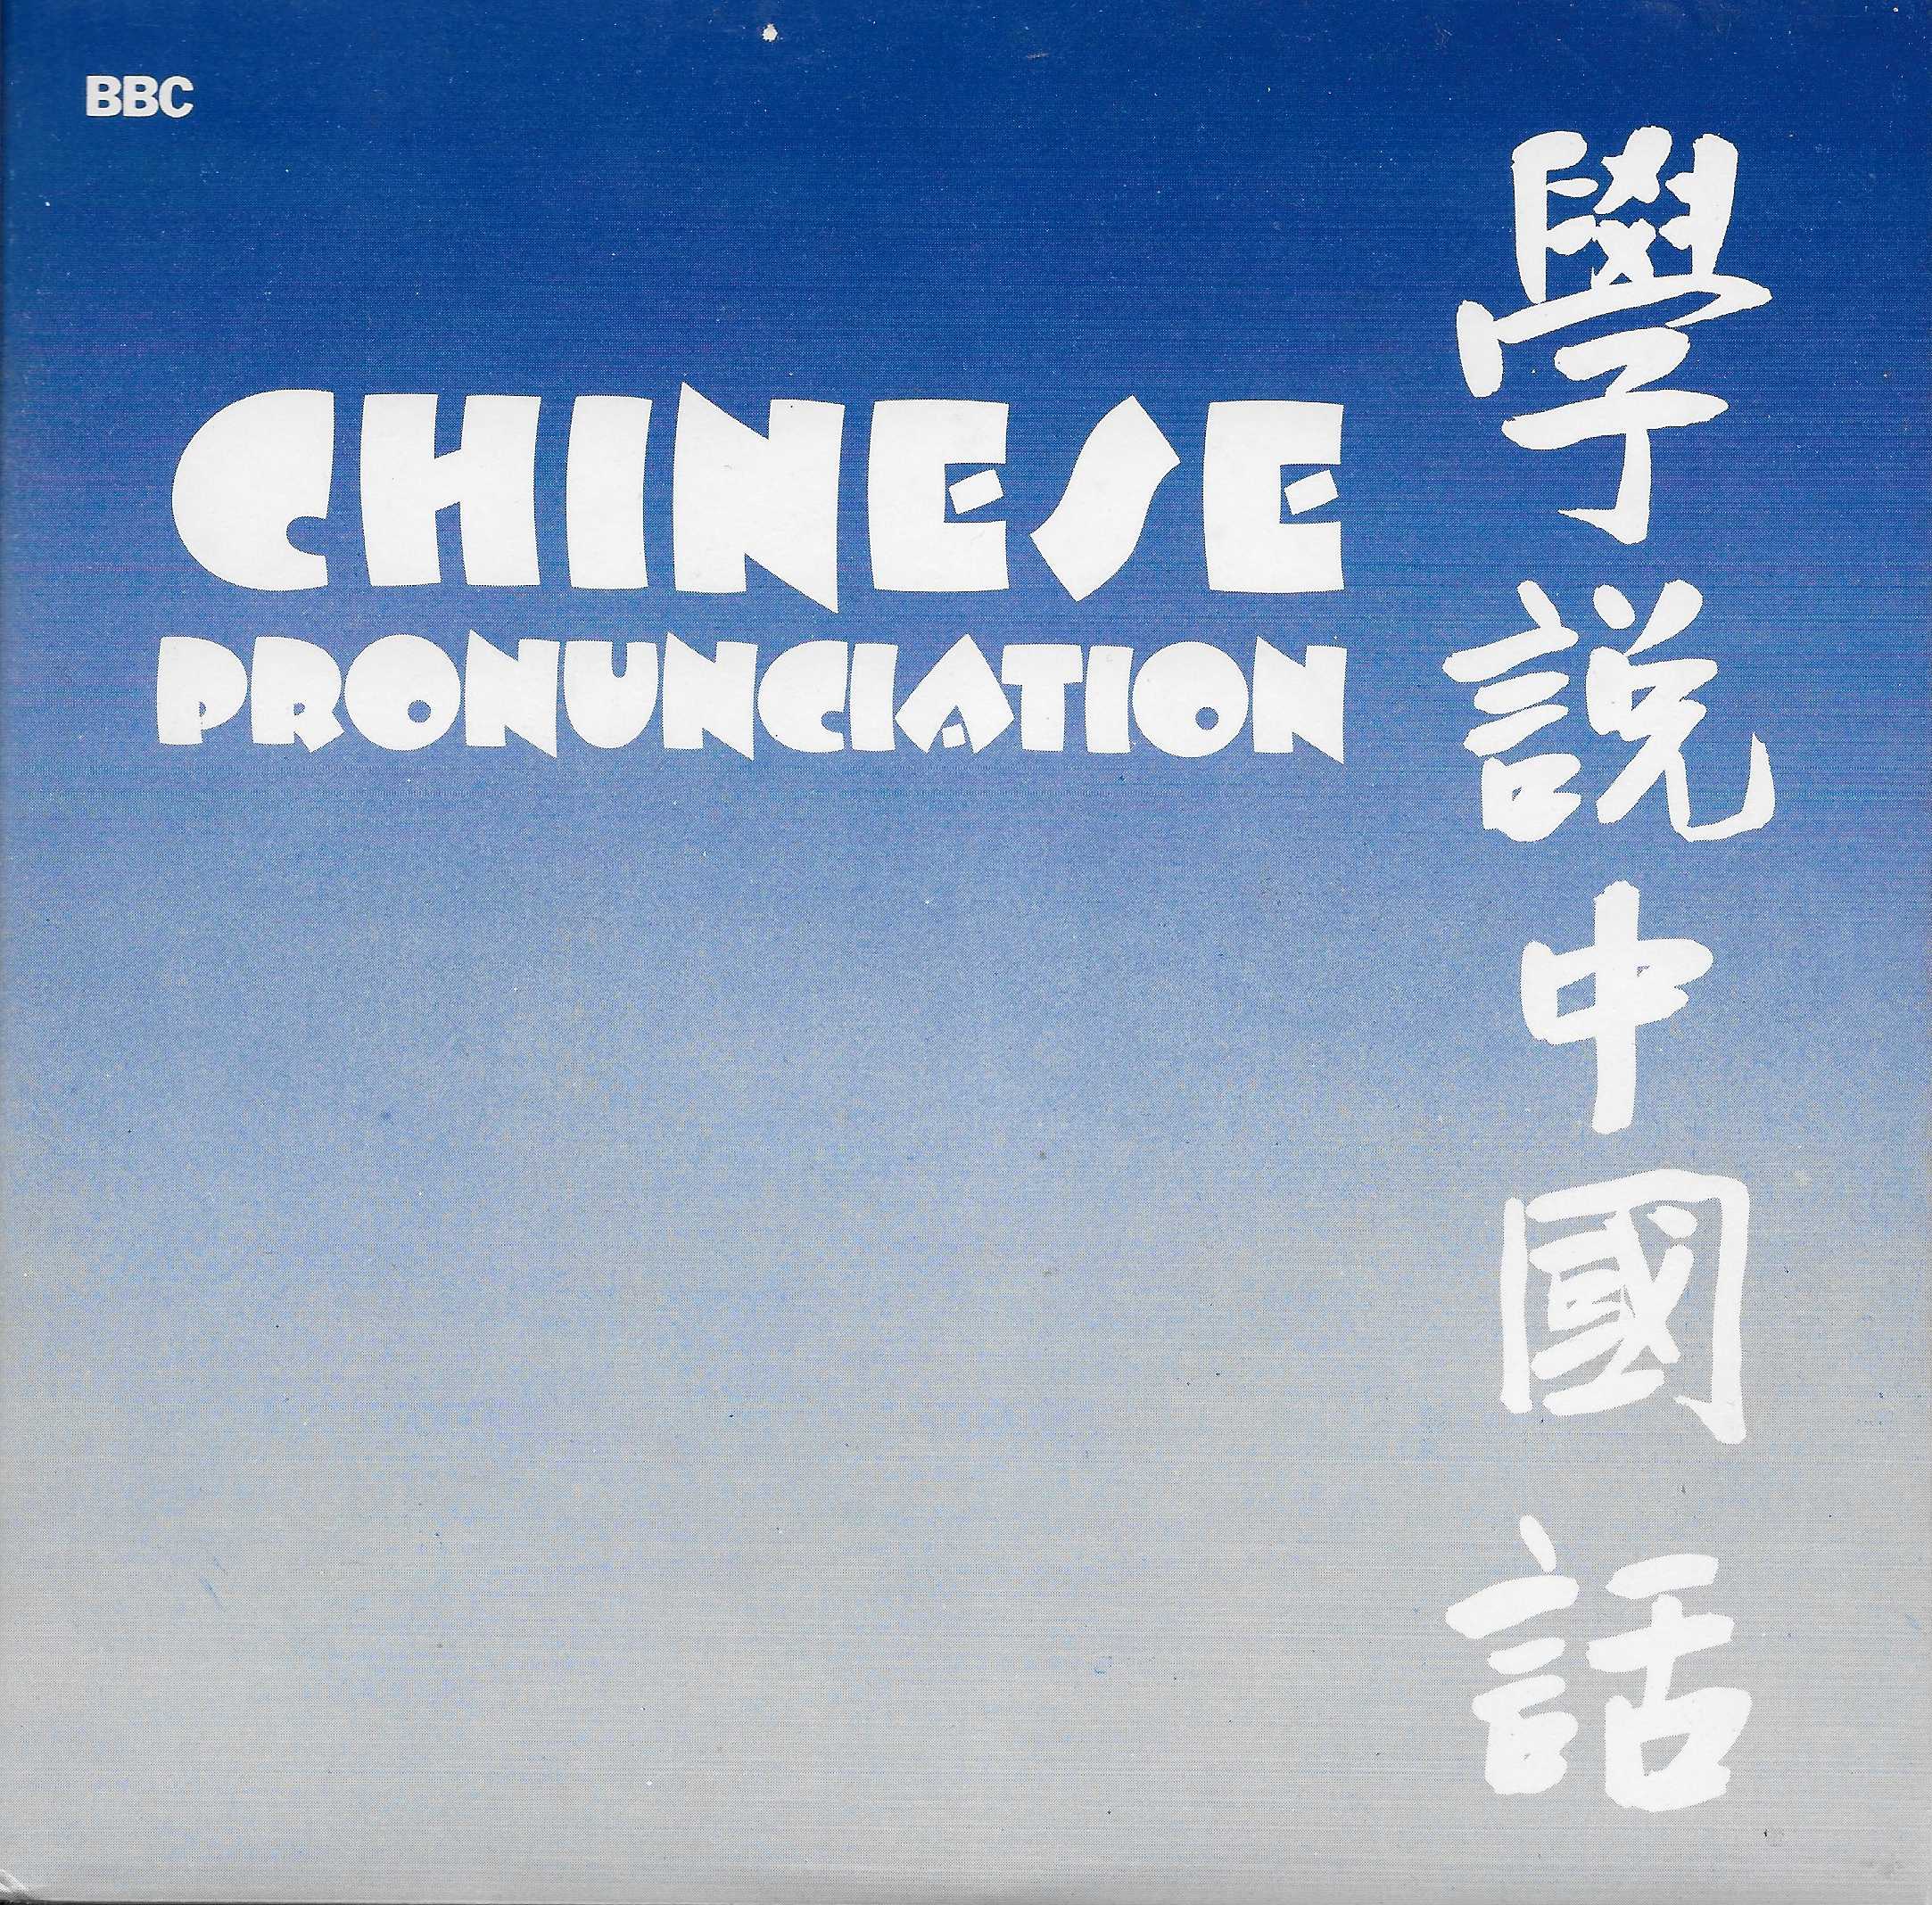 Picture of OP 107 Chinese pronunciation practice (Mandarin) - Includes booklet by artist Paul Kratochvil / Terry Chang / Lucia Liu from the BBC records and Tapes library